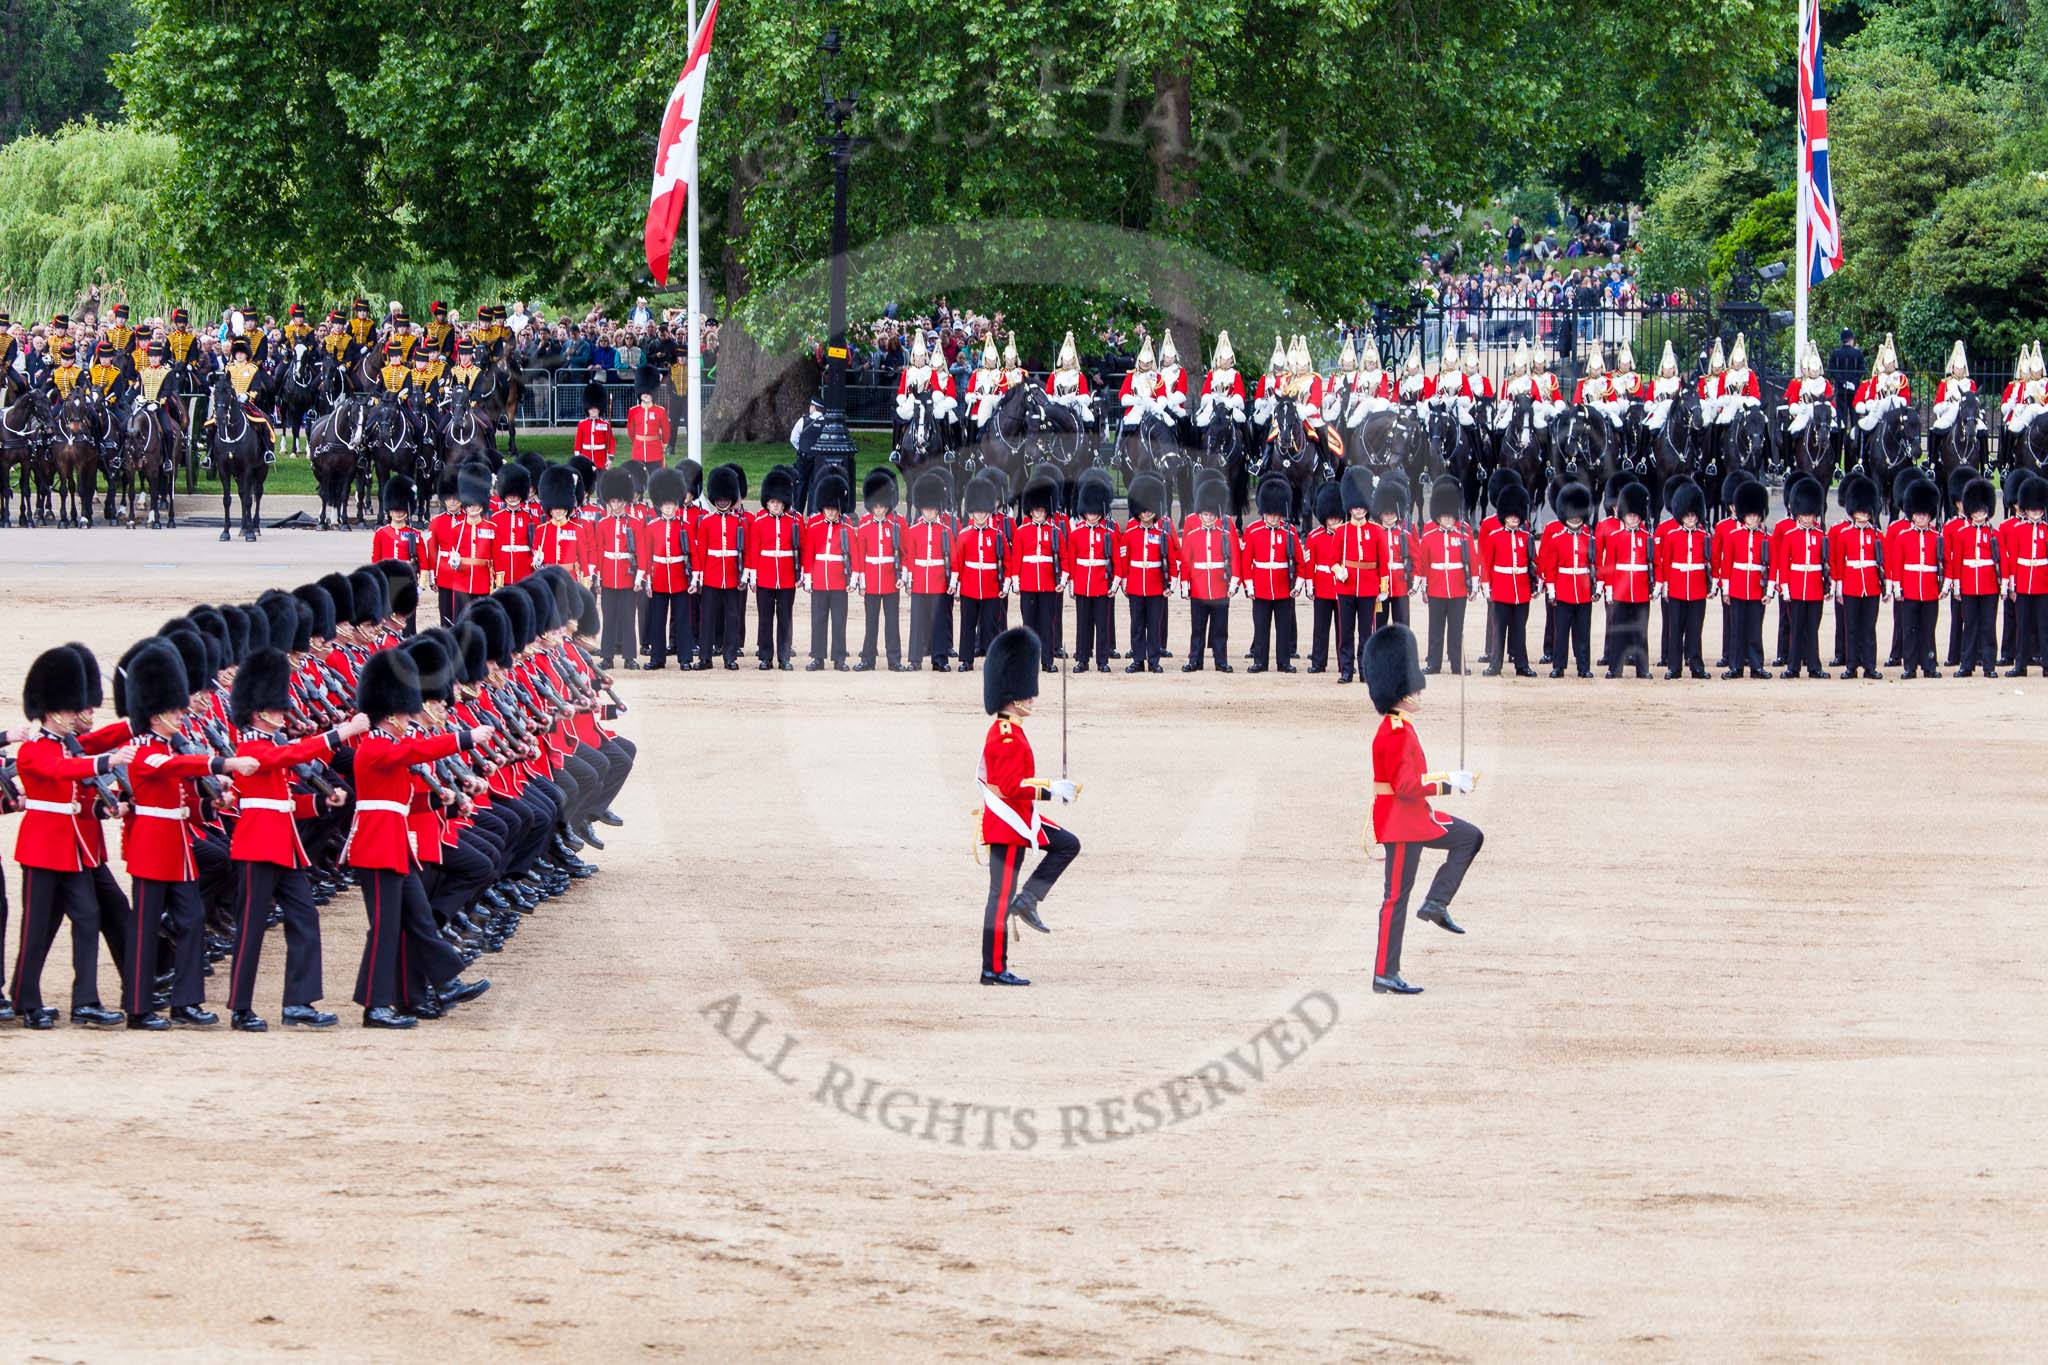 Trooping the Colour 2013: The men of No. 1 Guard (Escort for the Colour),1st Battalion Welsh Guards are moving into a new formation, facing the Coloir Party on the other side of Horse Guards Parade. In front the Ensign, Second Lieutenant Joel Dinwiddle, and the Subaltern, Captain F O Lloyd-George. Image #441, 15 June 2013 11:18 Horse Guards Parade, London, UK